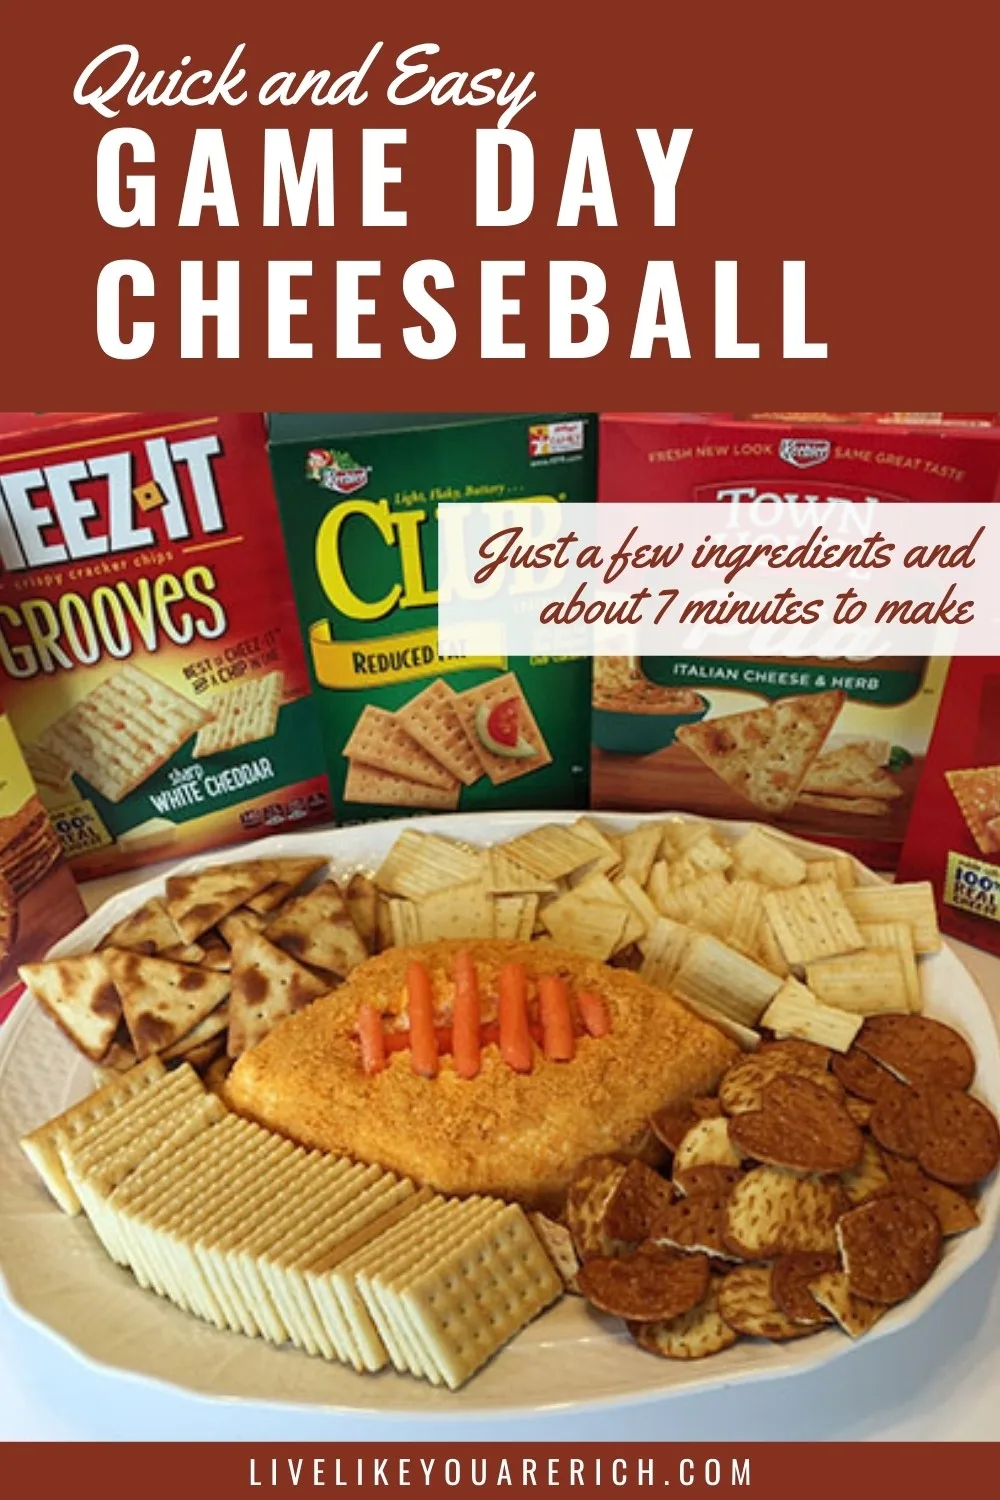 Game Day Cheeseball. This game day Cheeseball dip is very simple. You need just a few ingredients and about 7 minutes to make it. This is a perfect football game party, tailgating and game day foods. #tgamedayfood #cheeseball 